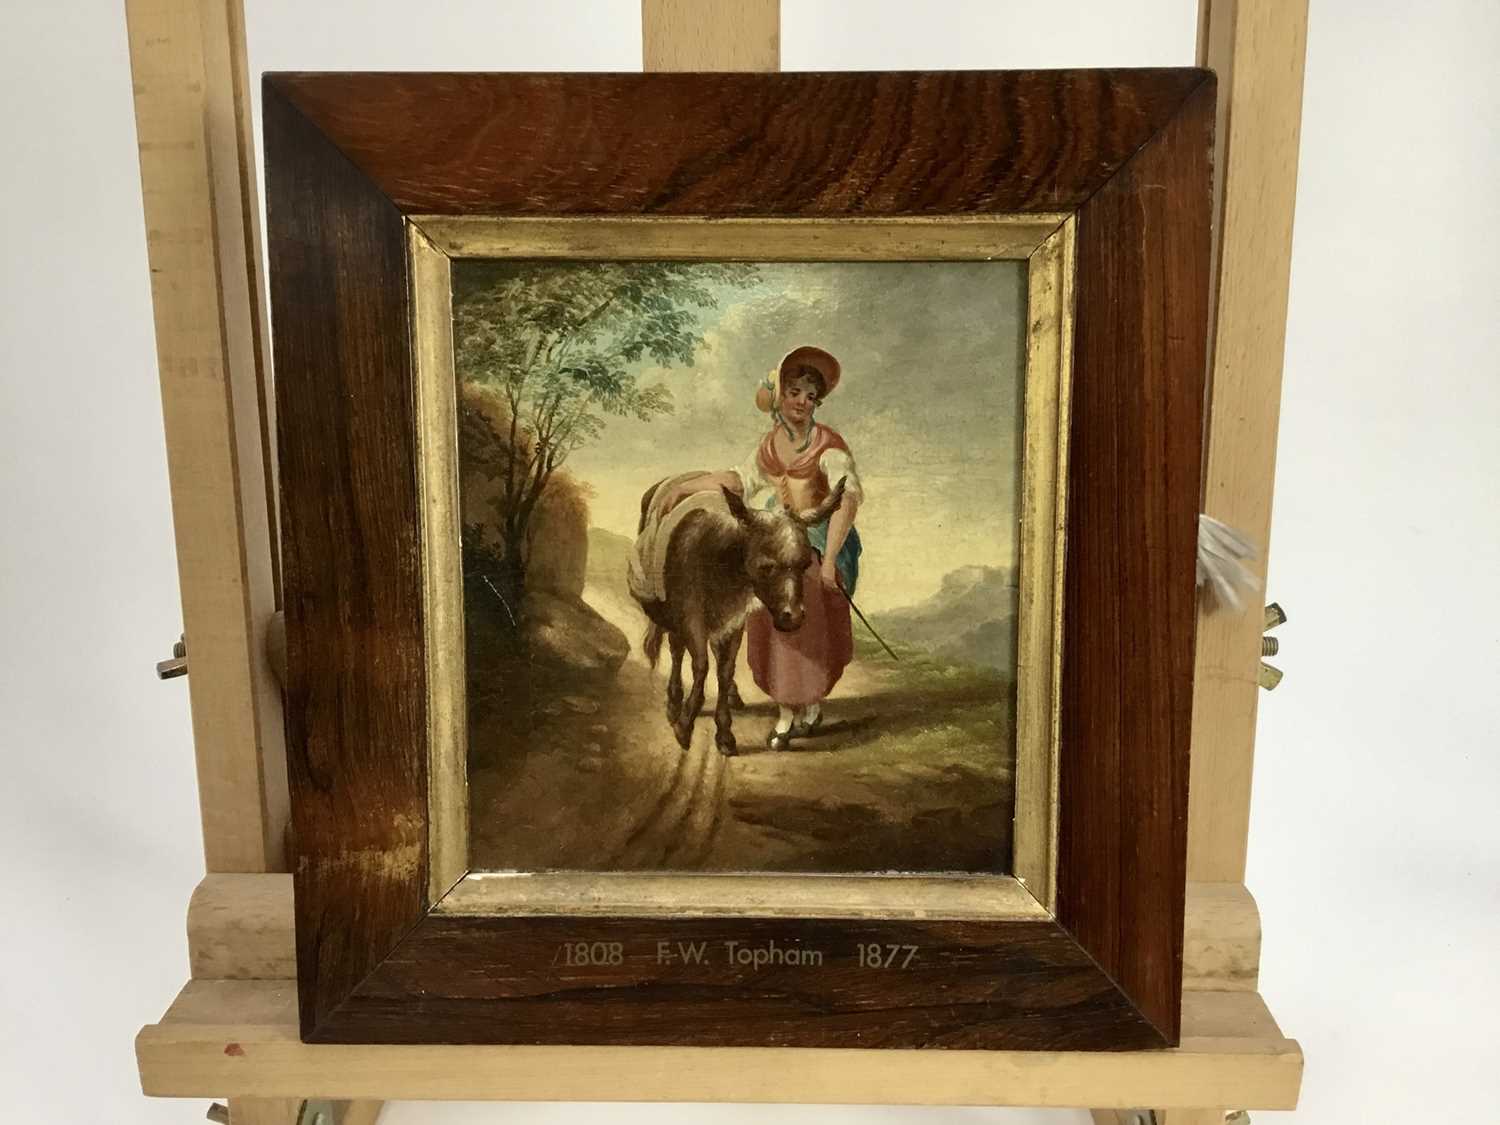 Francis William Topham (1808-1877), oil on panel, A young peasant girl and her donkey on a hilly tra - Image 2 of 5